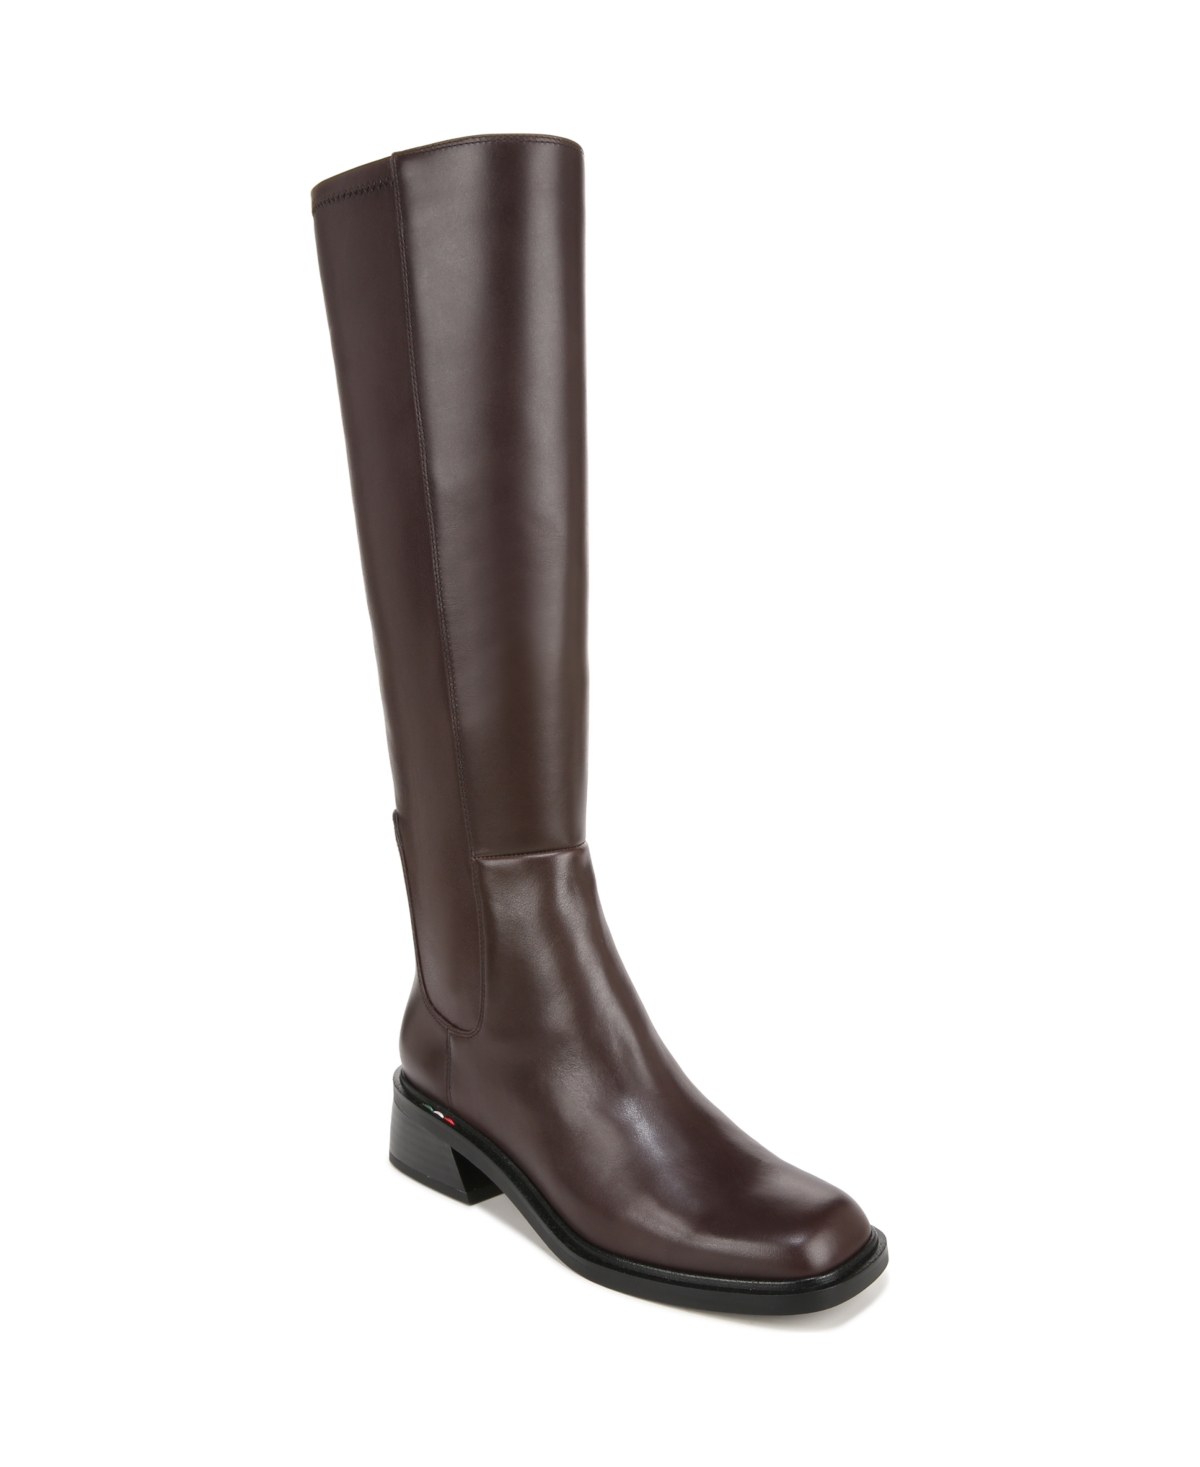 Giselle Wide Calf High Shaft Boots - Castagno Brown Leather